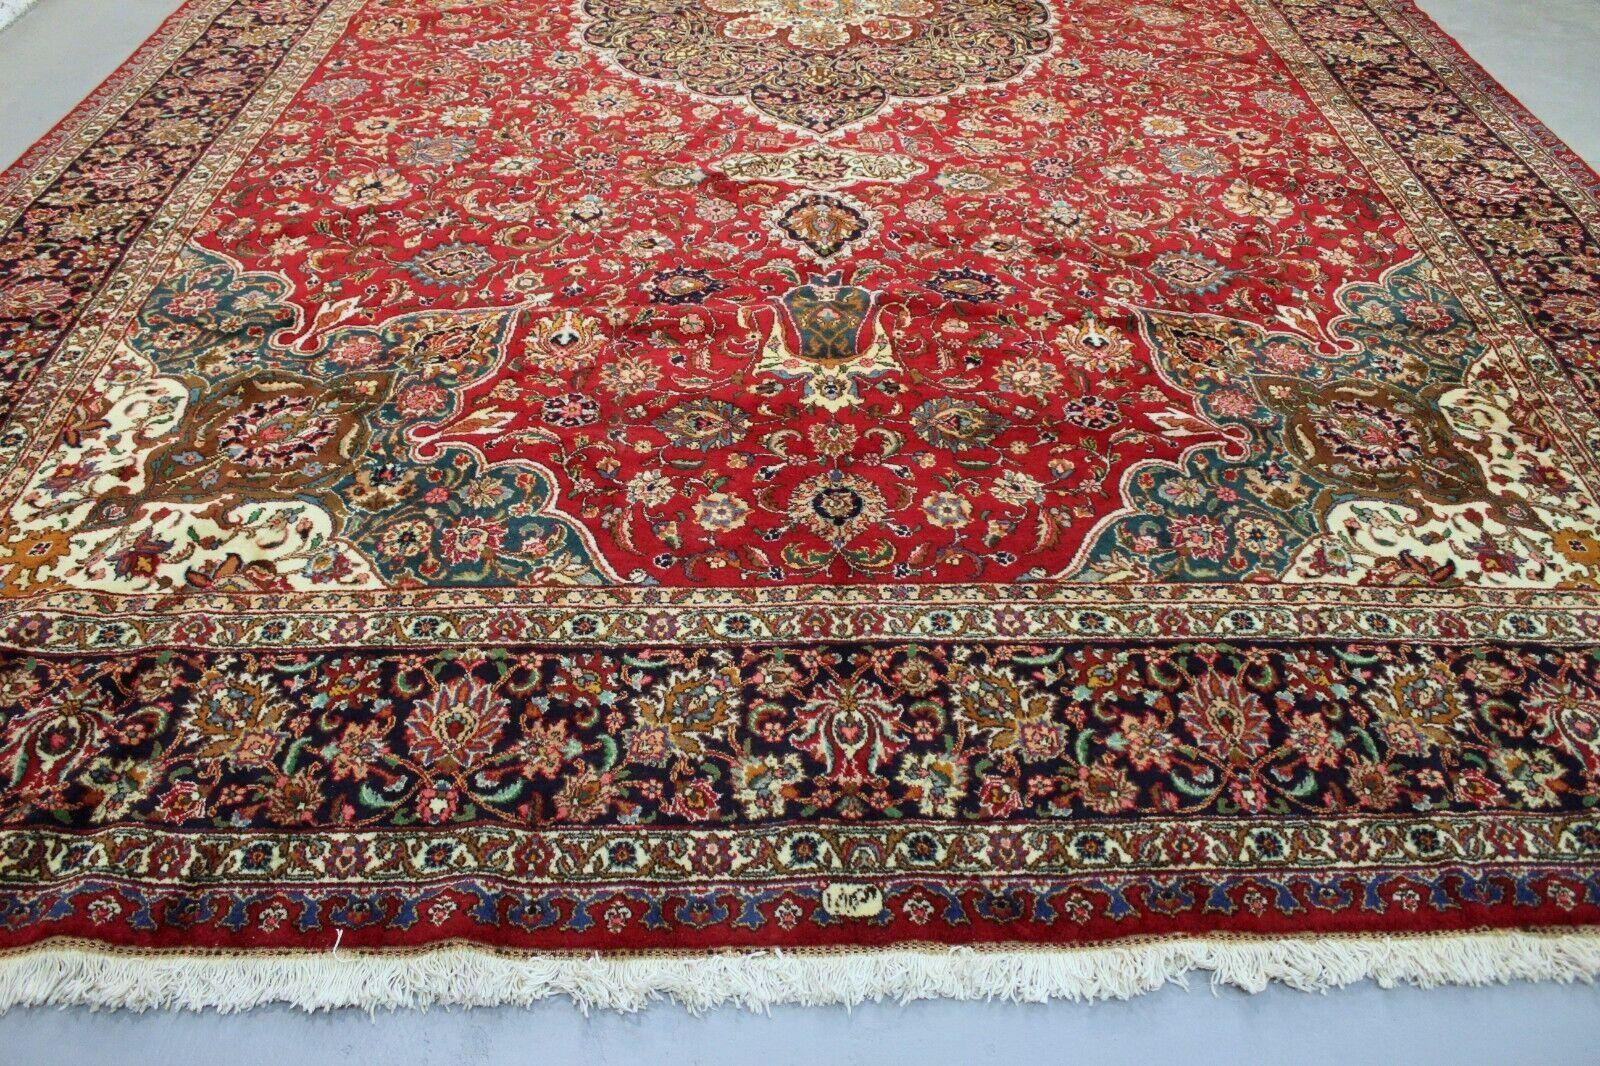 Handmade Vintage Persian Style Tabriz Oversize Rug 12.3' x 20.6', 1960s - 1K47 In Good Condition For Sale In Bordeaux, FR